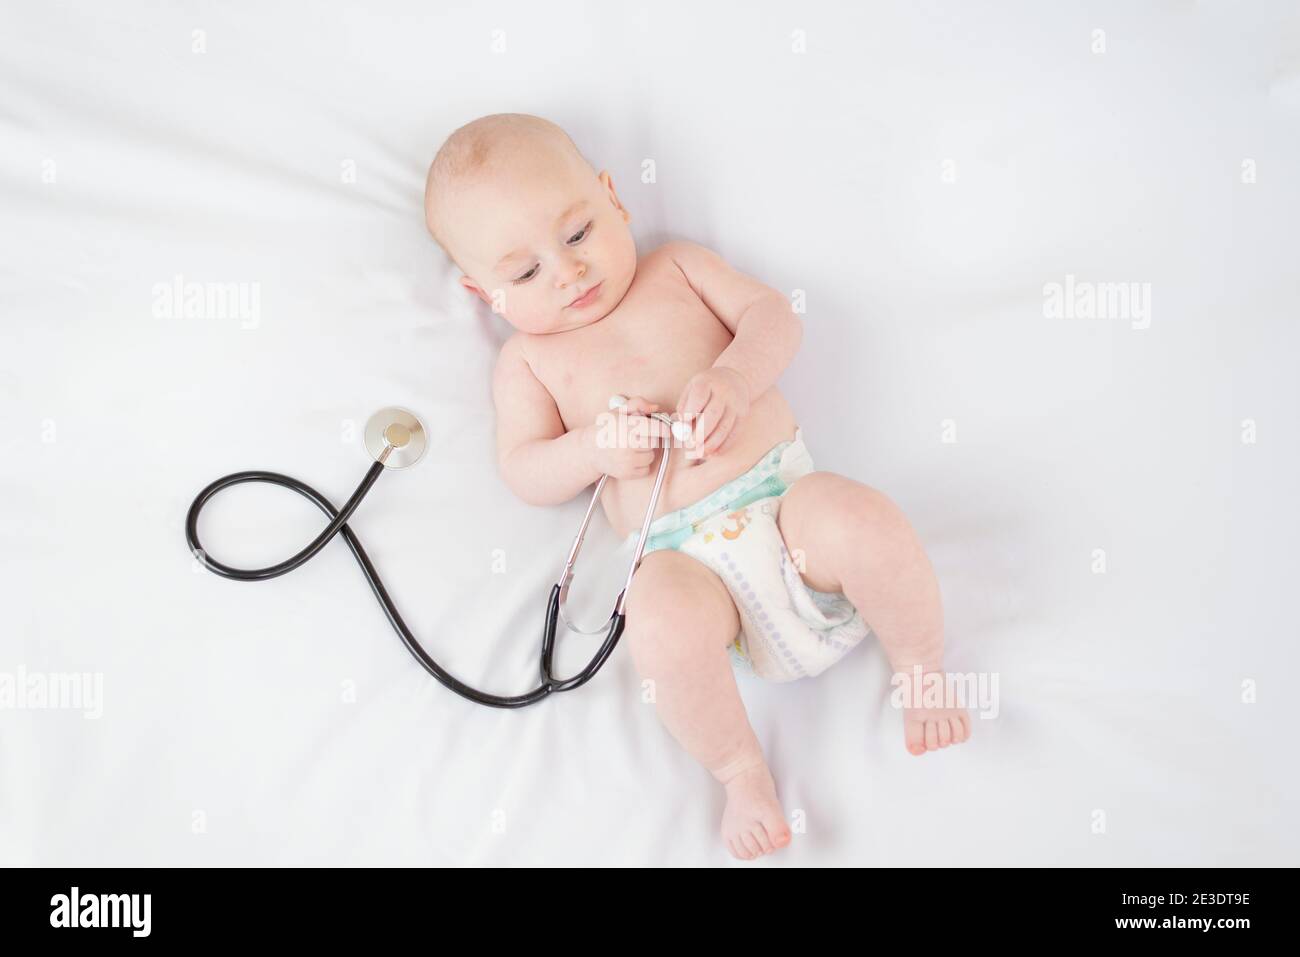 Sweet baby with stethoscope on a white background Stock Photo